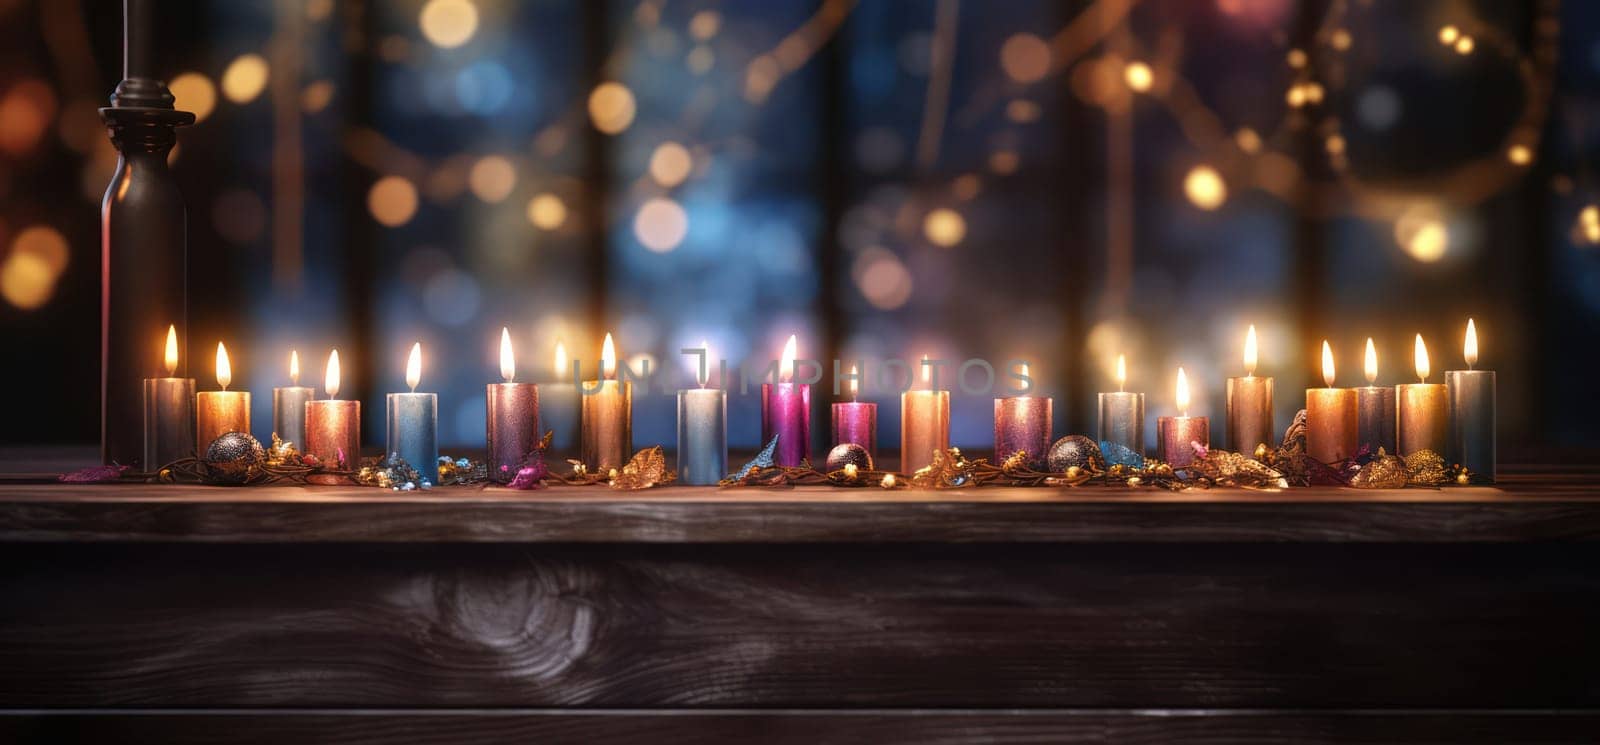 Festive Candlelight: A Rustic Christmas Celebration with Glowing Flames and Golden Illumination by Vichizh